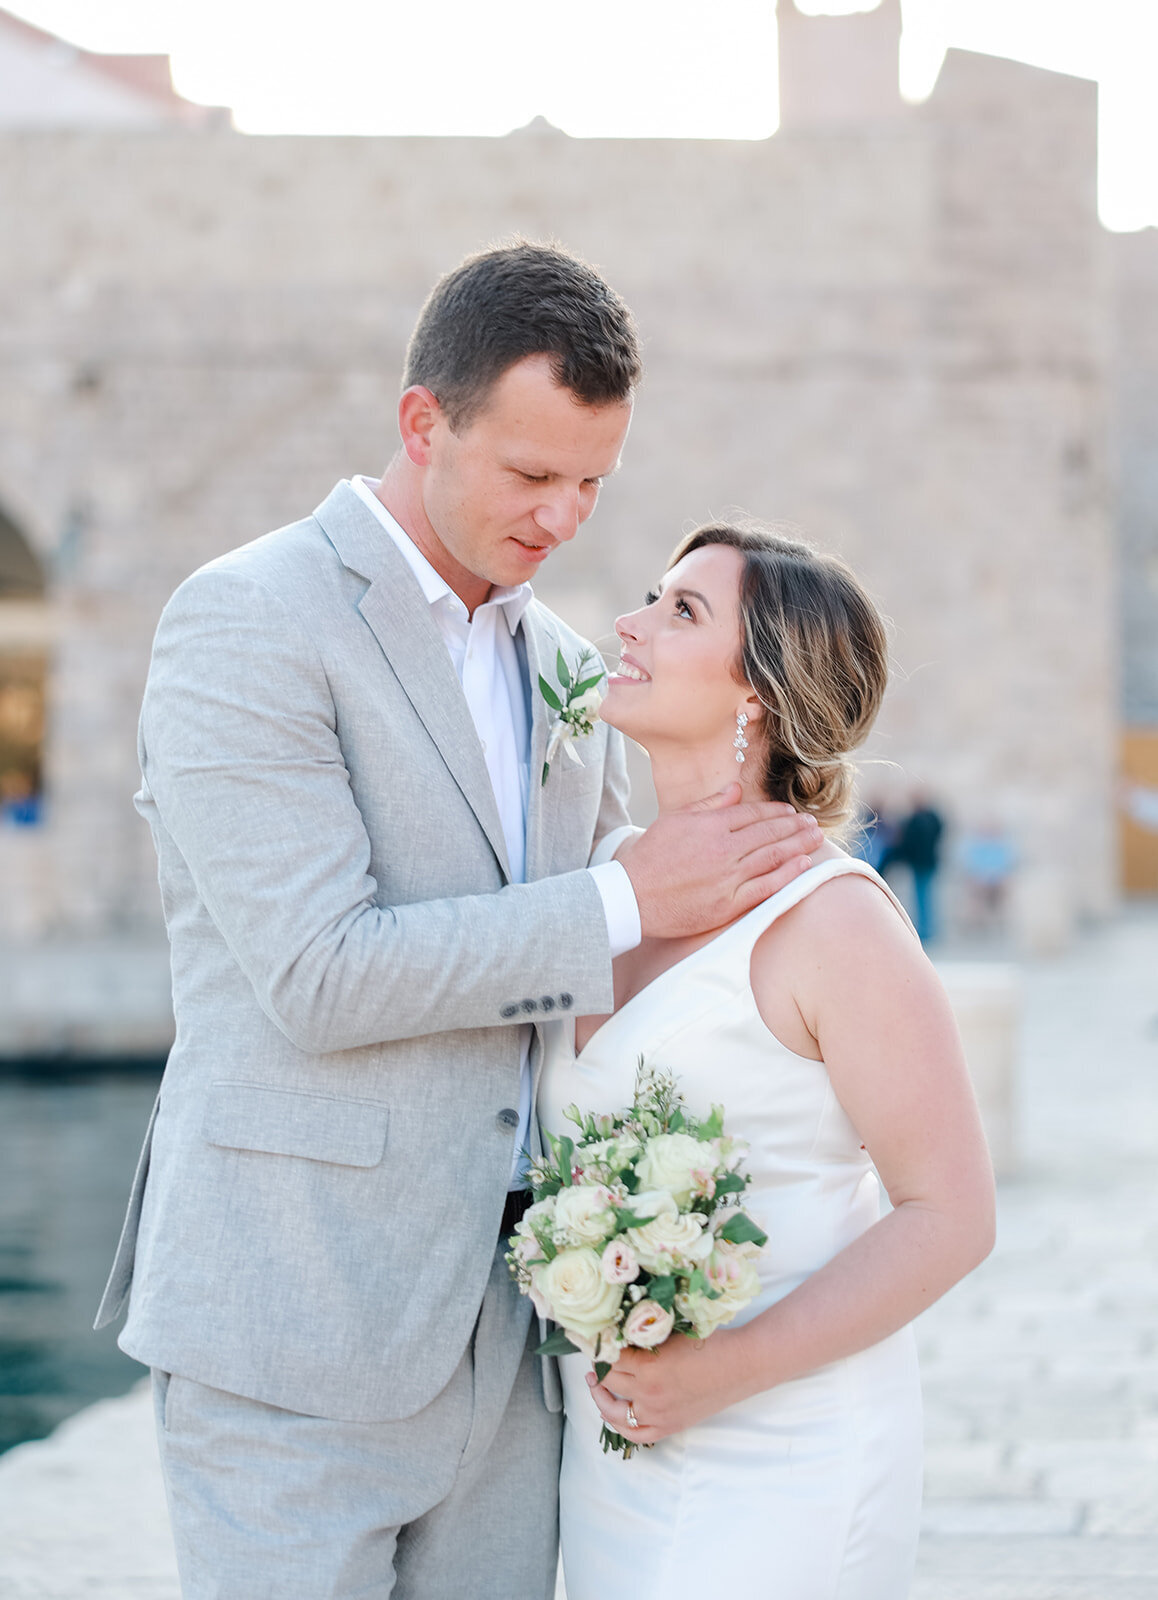 Unforgettable Luxury in Croatia: Immerse yourself in the enchanting beauty of a luxury destination wedding in Croatia through our captivating image gallery. These carefully curated images epitomize the timeless charm and sophistication that can be achieved. Trust our high-end wedding planner to curate a flawless celebration, ensuring every detail is meticulously executed for an unforgettable experience.